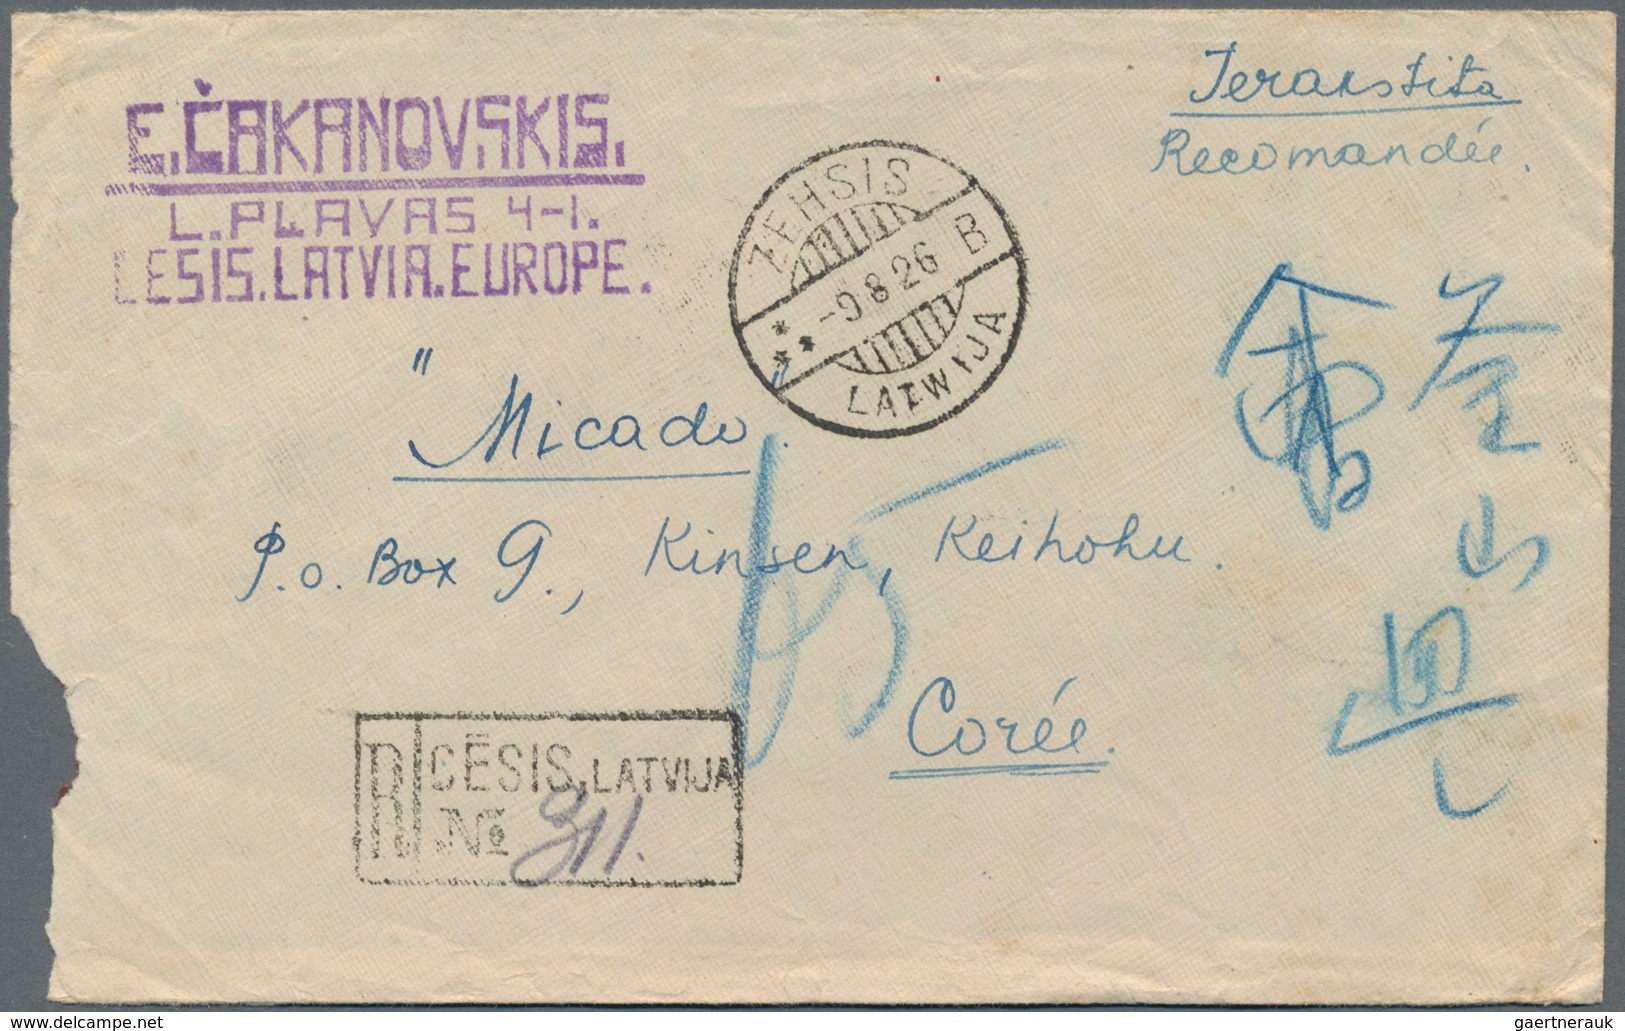 Lettland: 1924/26, Two Covers To Kinsen/Korea From Latvia Resp. Lithuania: Registered From "ZEHSIS 9 - Latvia